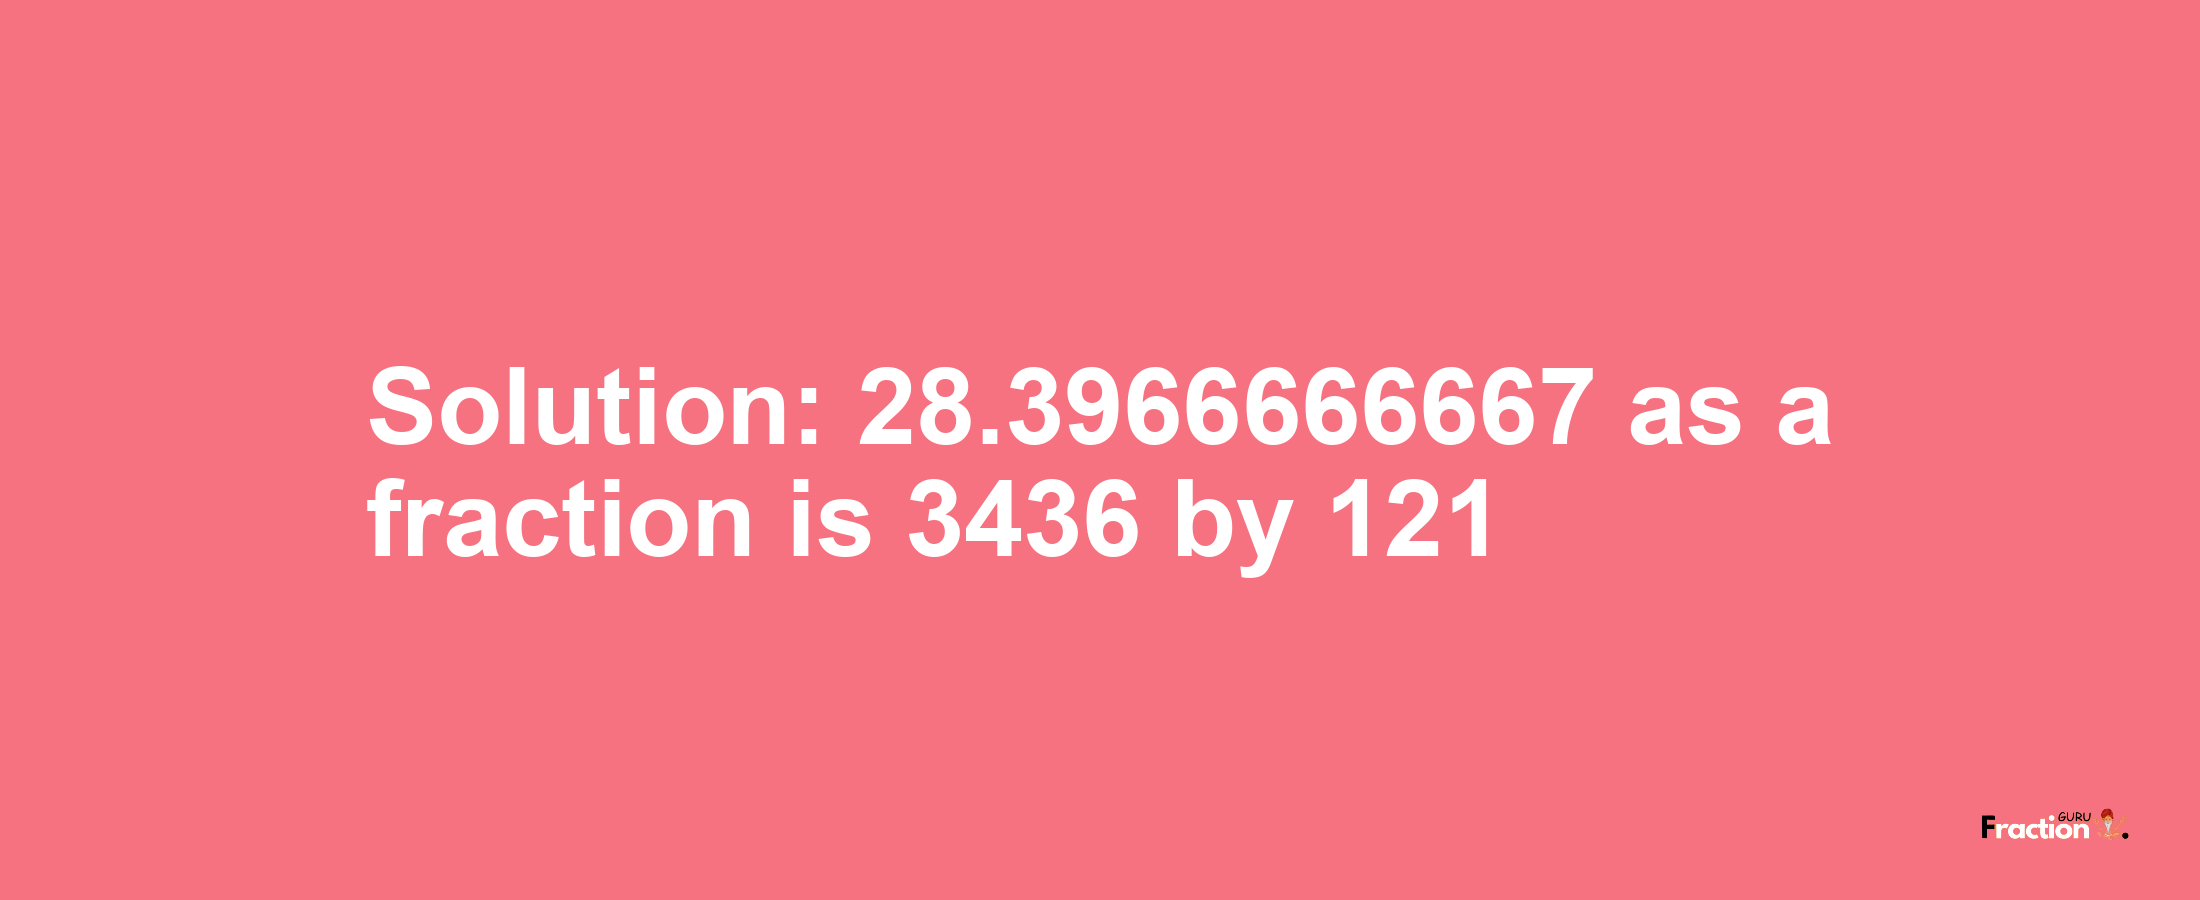 Solution:28.3966666667 as a fraction is 3436/121